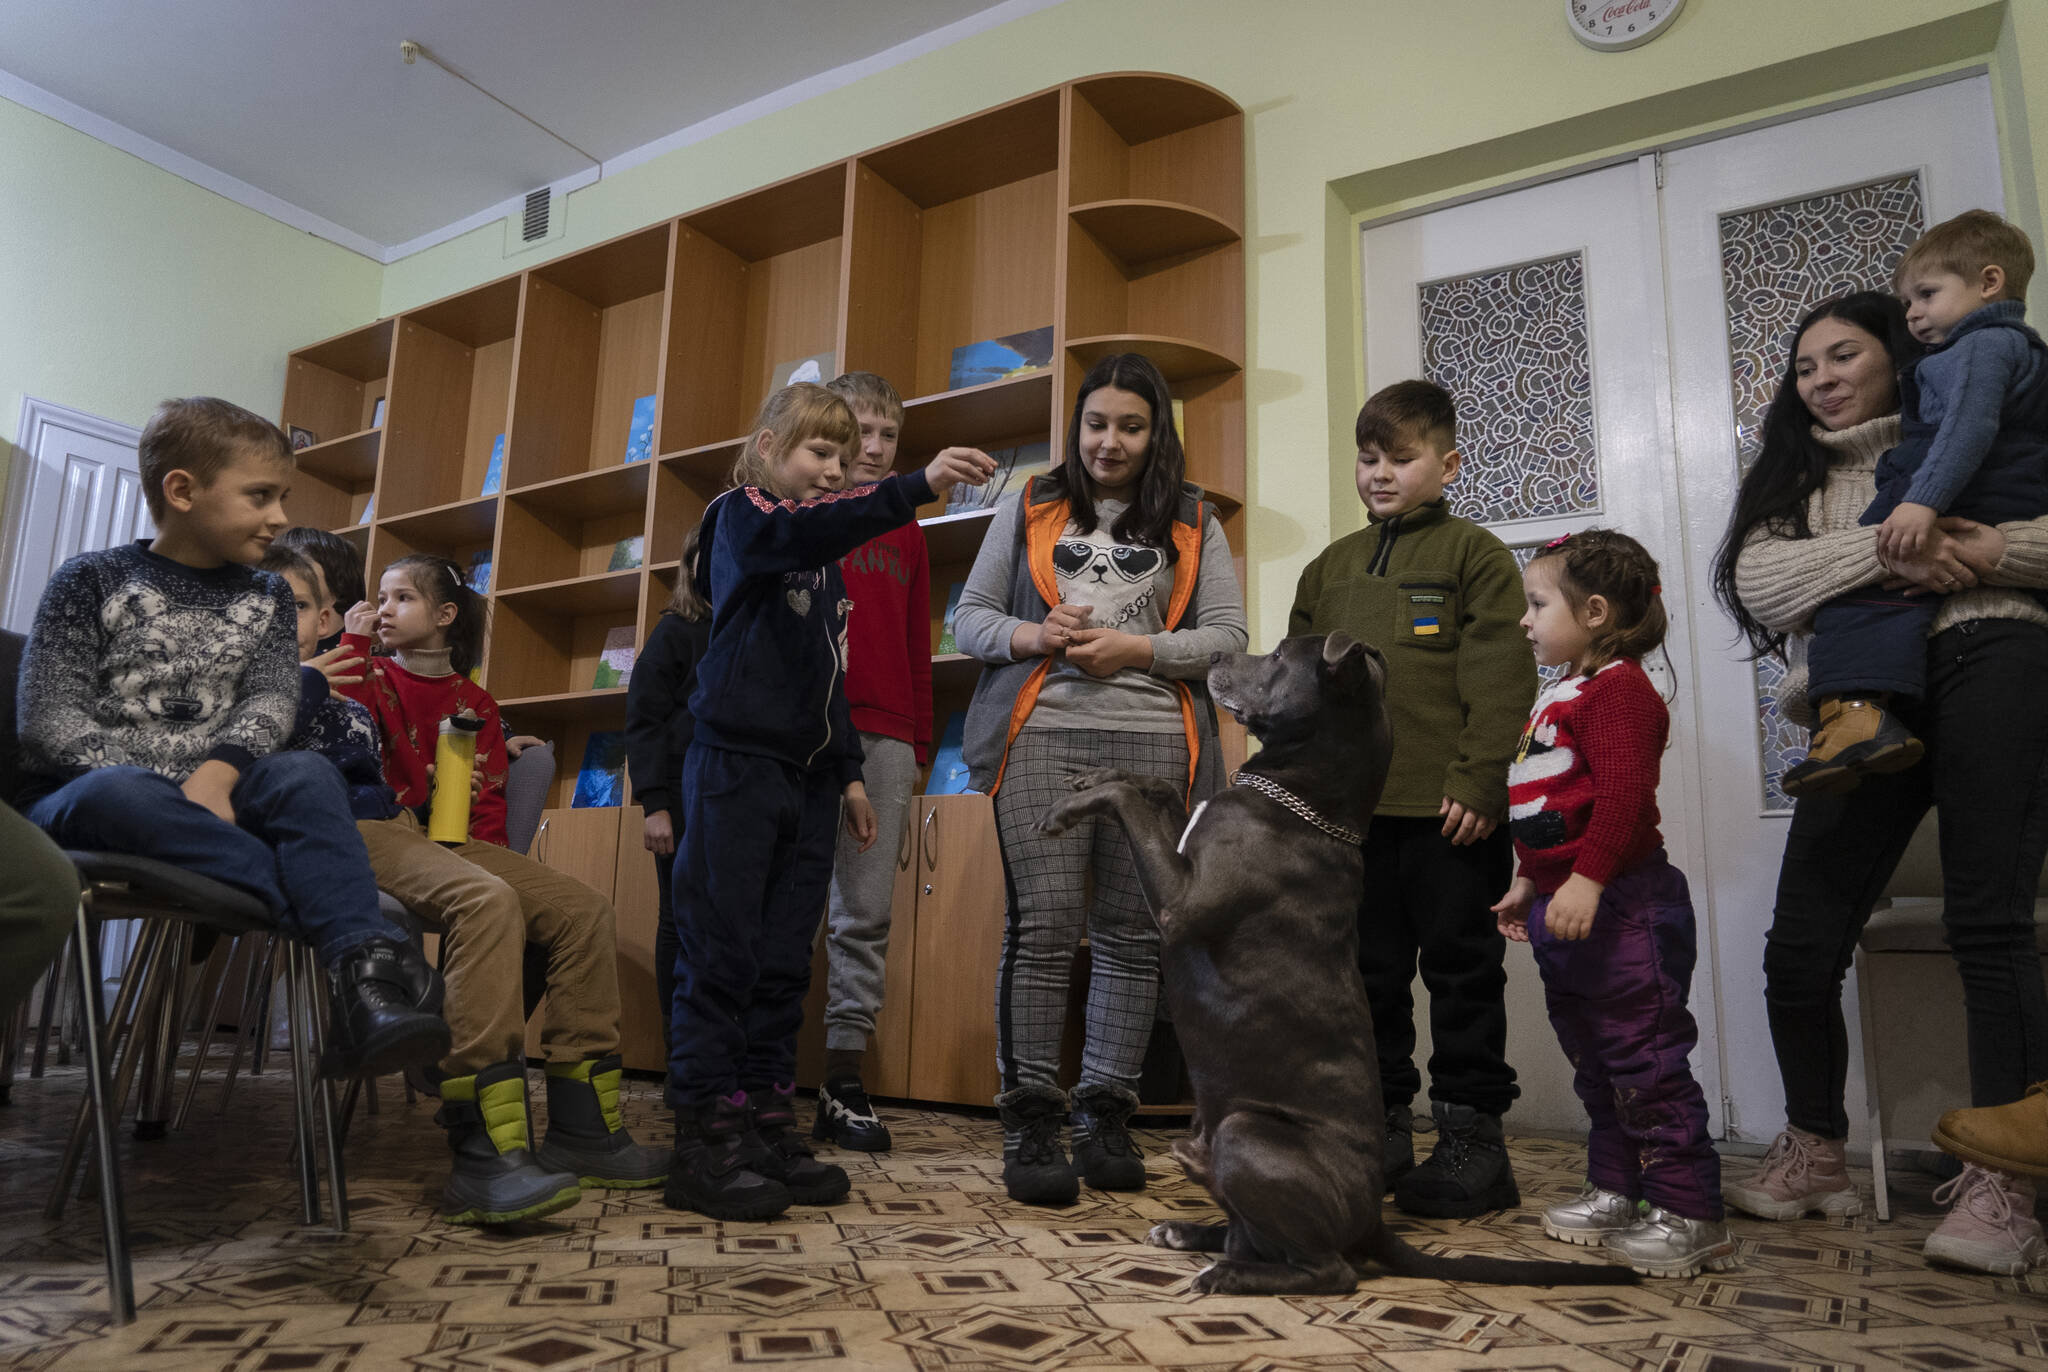 Children traumatized by the war play with an American Pit Bull Terrier "Bice" in the Center for Social and Psychological Rehabilitation in Boyarka close Kyiv, Ukraine, Wednesday, Dec. 7, 2022. Bice is an American pit bull terrier with an important and sensitive job in Ukraine — comforting children traumatized by the war. The Center for Social and Psychological Rehabilitation is a state-operated community center where a group of people are trying to help those who have experienced a trauma after the Feb. 24 Russian invasion, and now they are using dogs like Bice to give comfort. (AP Photo / Vasilisa Stepanenko)